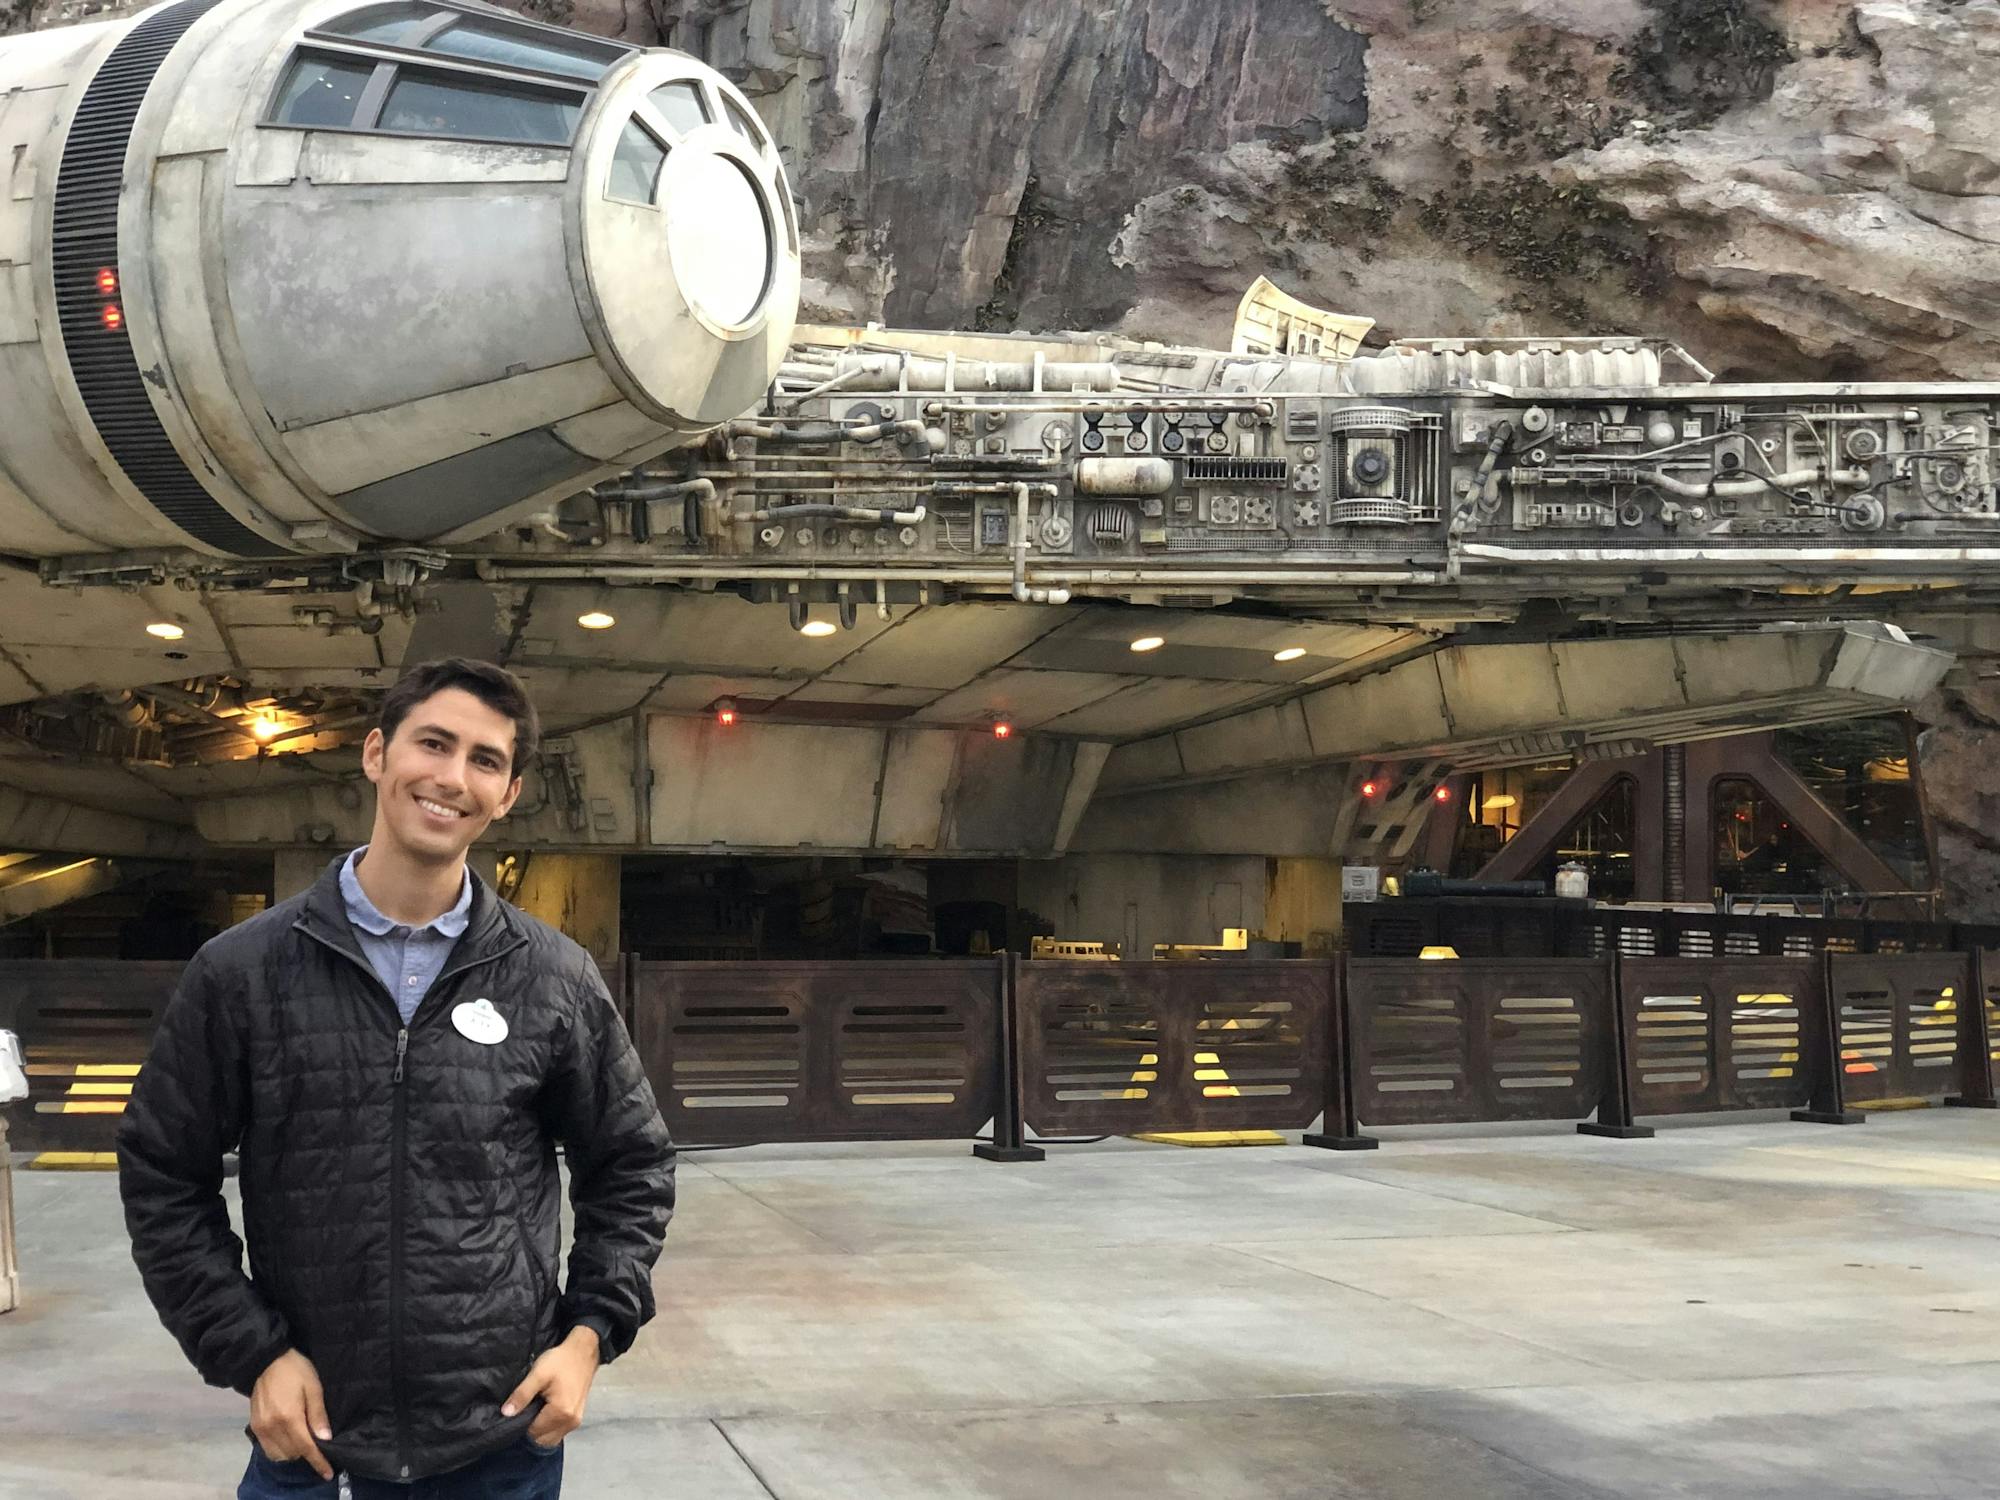 A young man smiles next to a Disneyland recreation of the Millennium Falcon from Star Wars